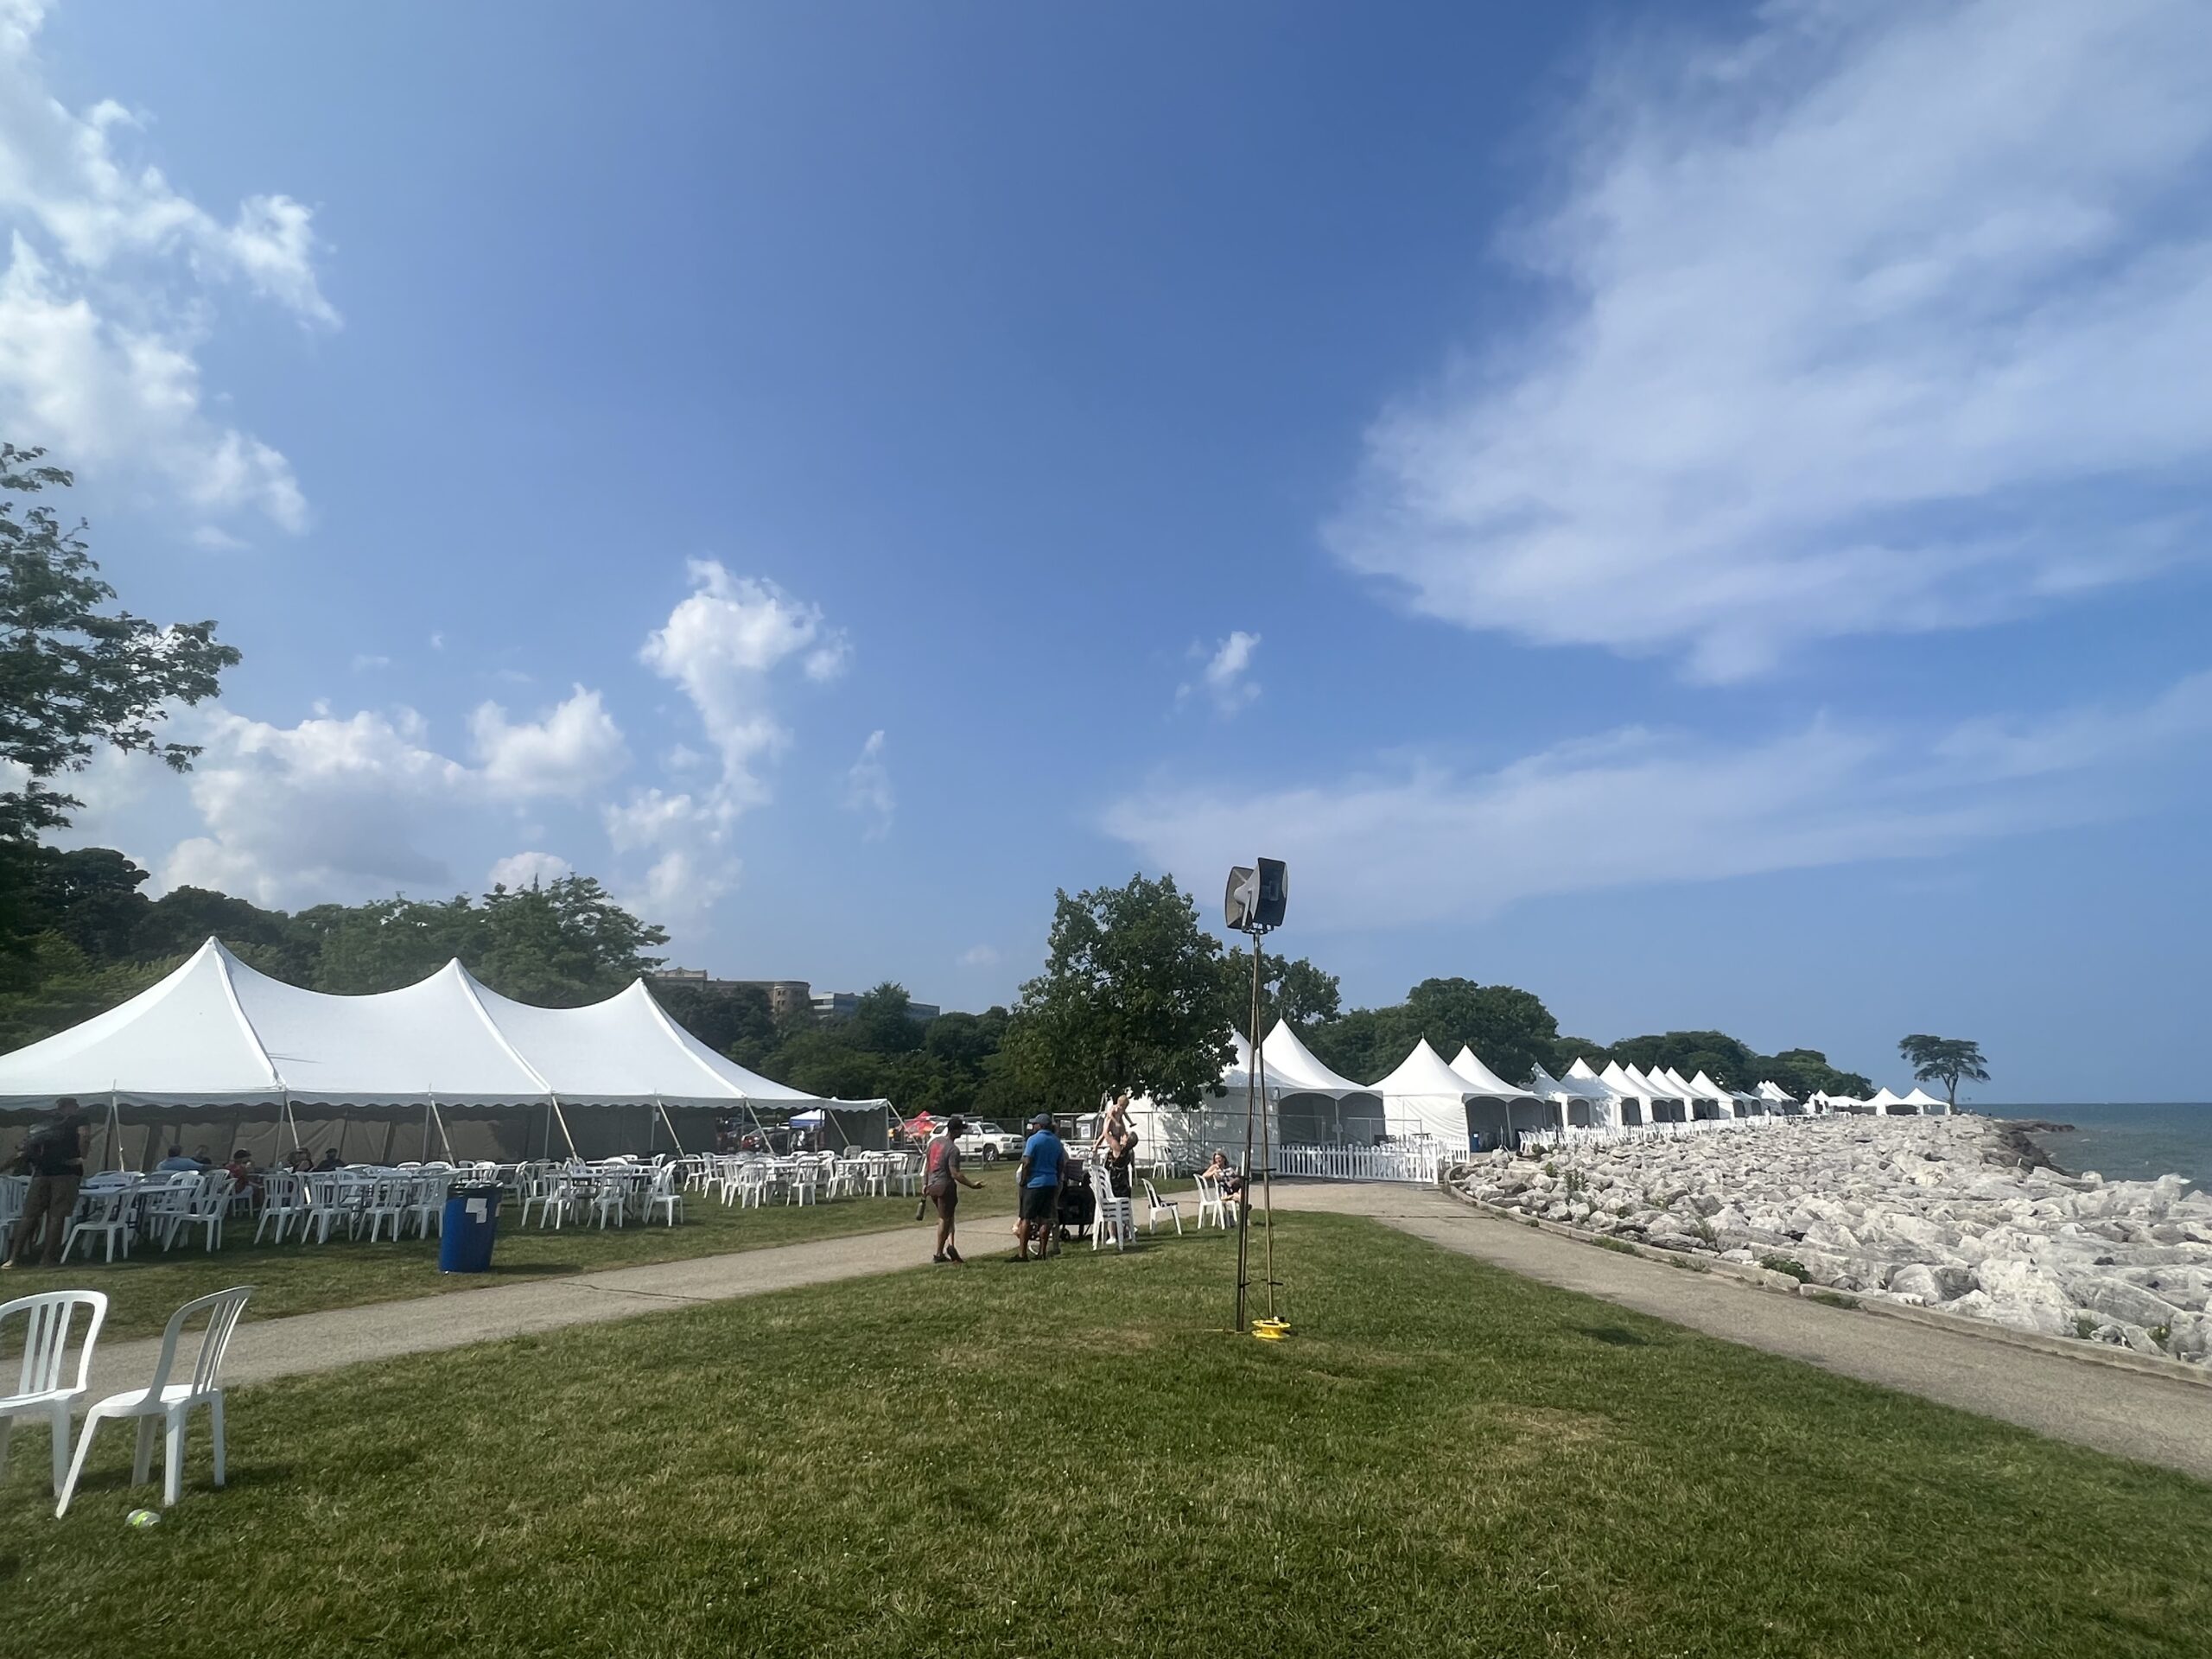 Tent and Fence Rental for the 2023 Milwaukee Air & Water Show